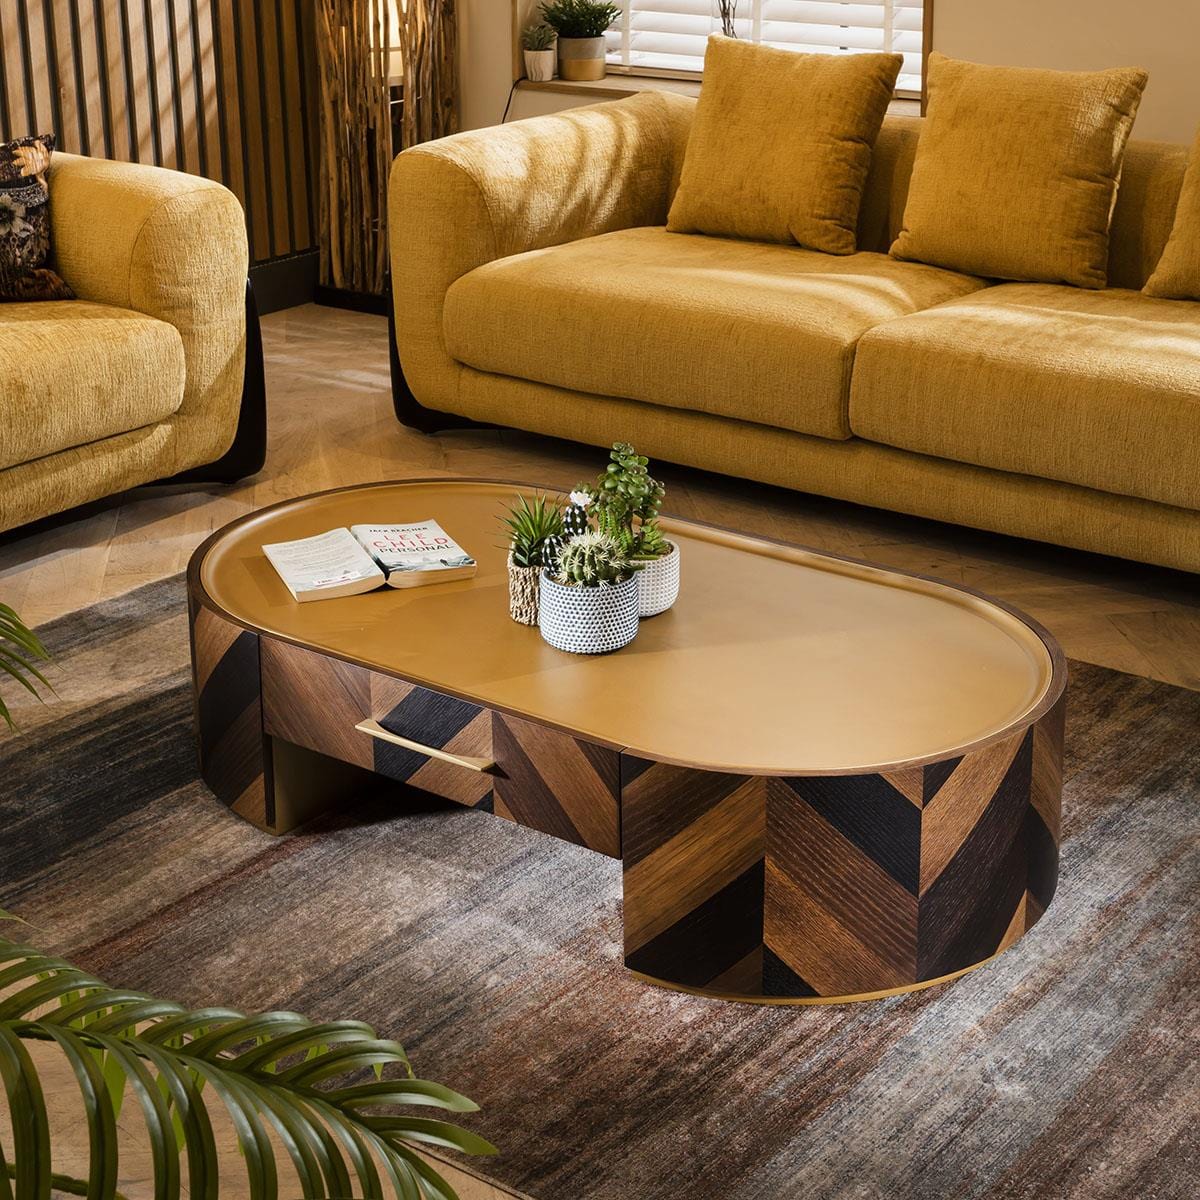 Quatropi Rodez Oval Coffee Table with Drawer Brown